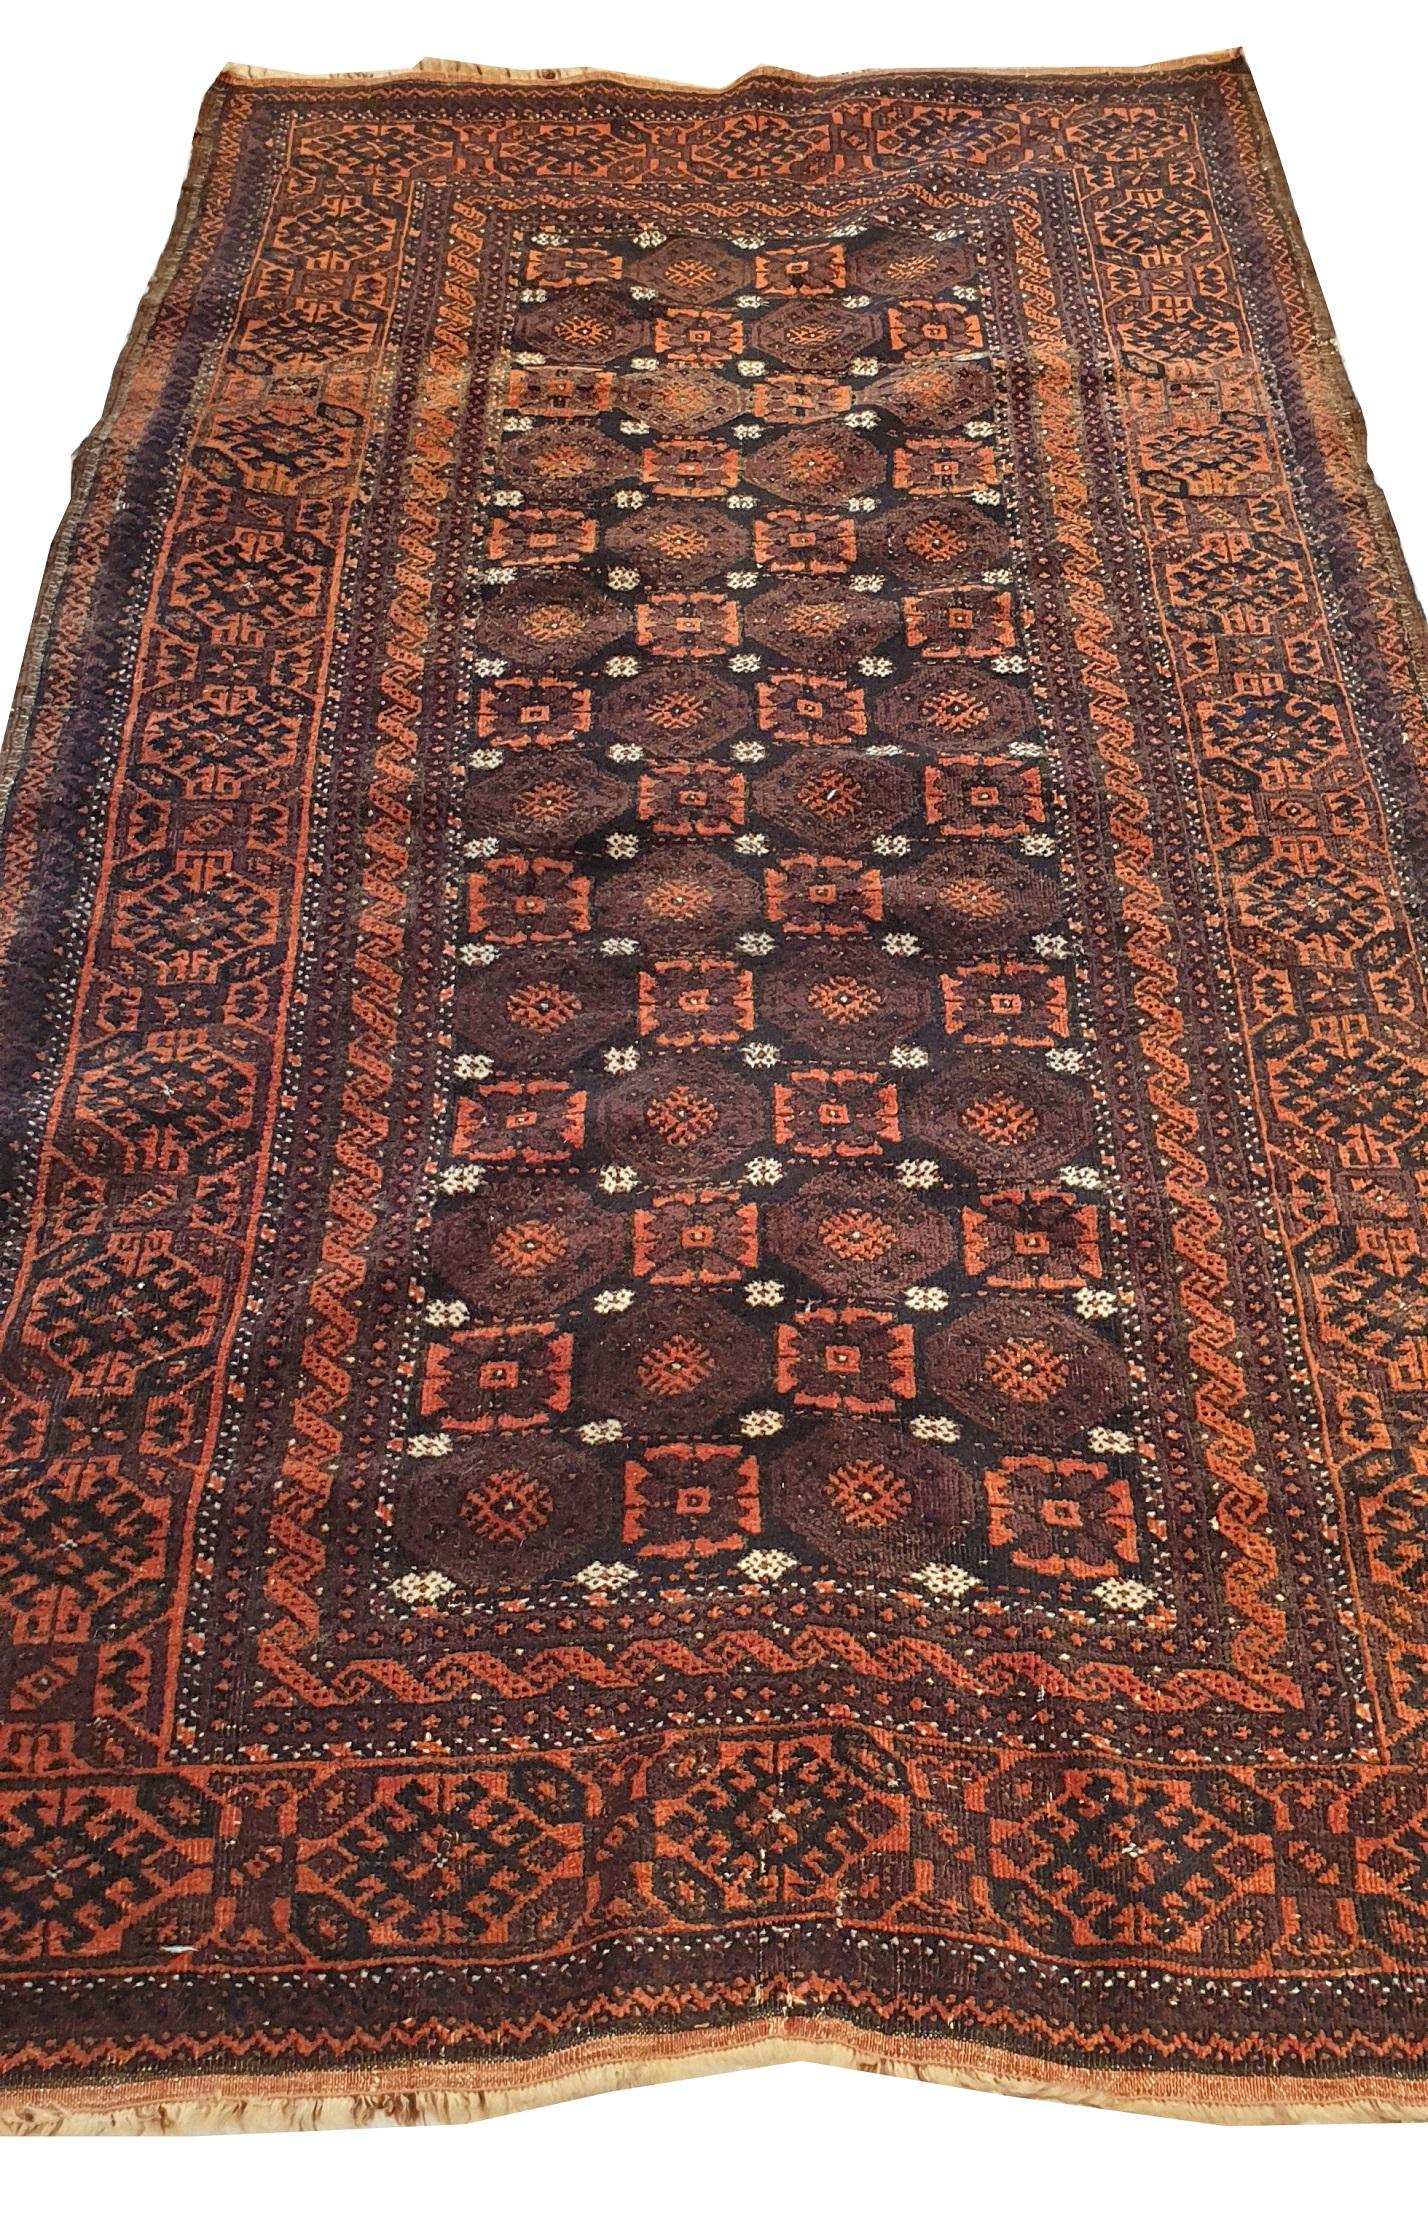 738 - beautiful Turkmen Bukhara carpet from the 20th century very decorative with a nice geometric design with Bukhara Guls and a red field with blue, finely knotted by hand with woolen velvet on a wool background.